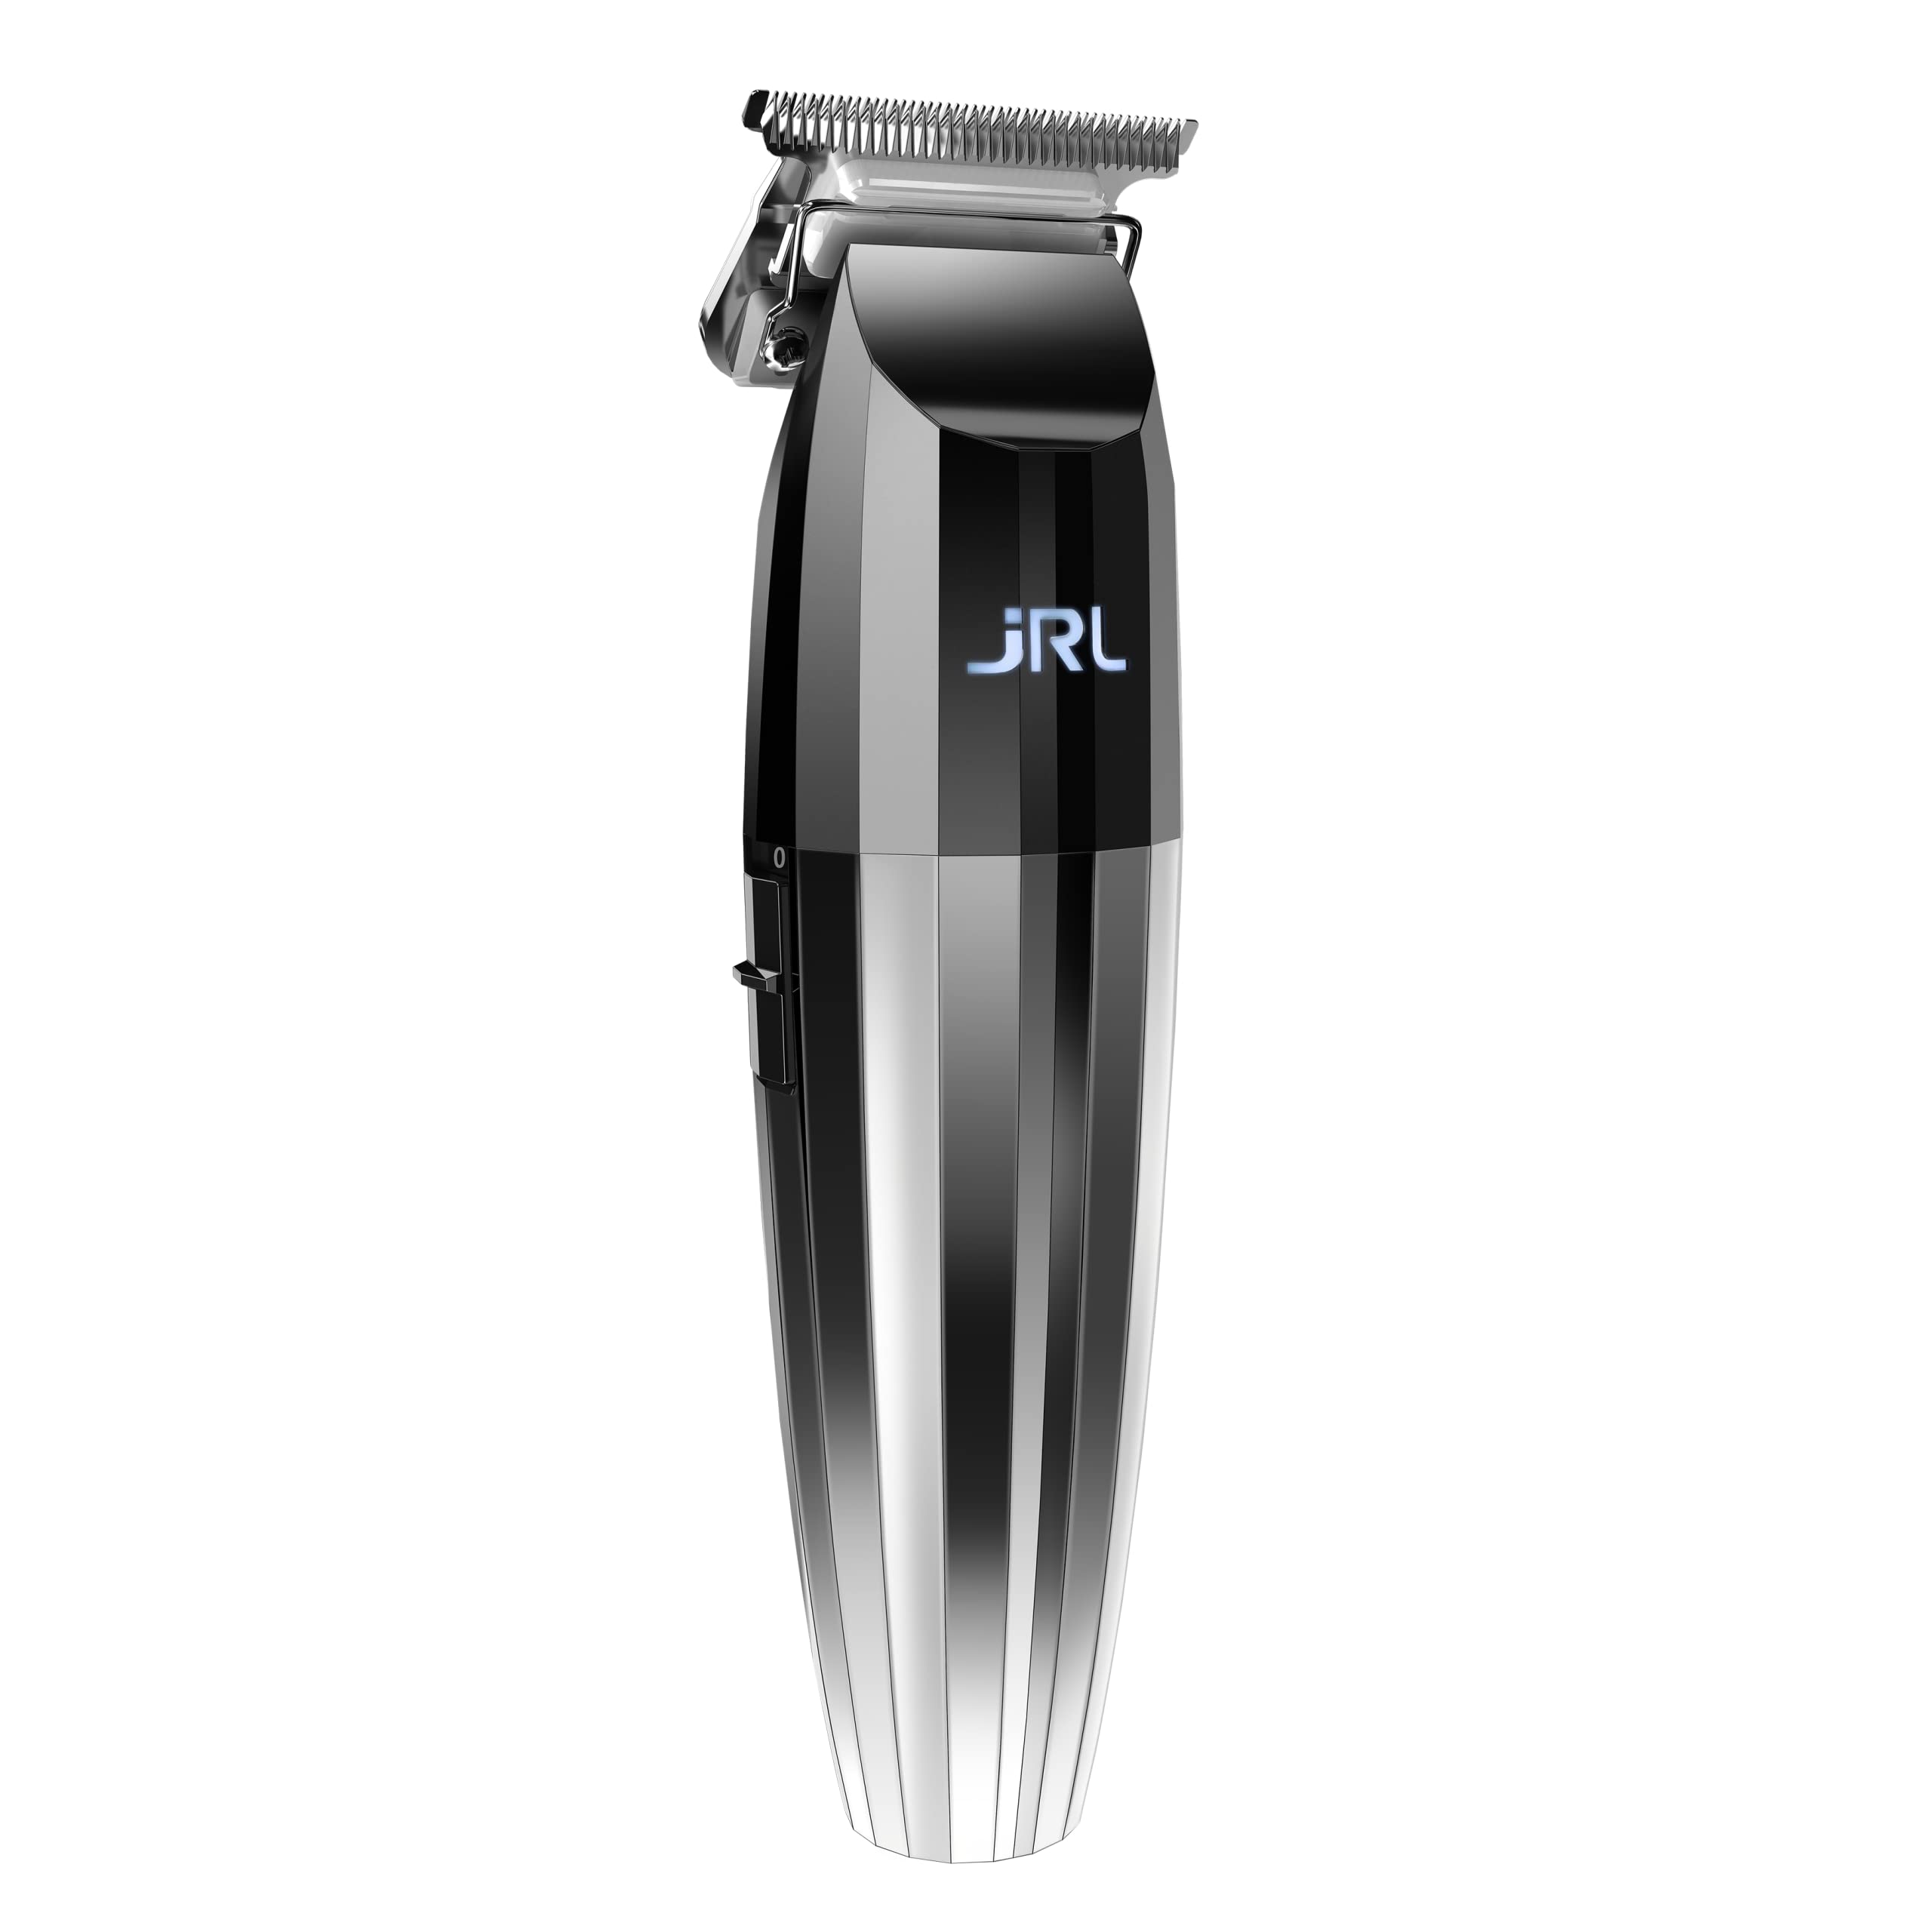 Amazon Series JRL FreshFade 2020T Trimmer - Professional Hair Trimmer w/Cool Blade Technology for Men's Grooming - Rechargeable 